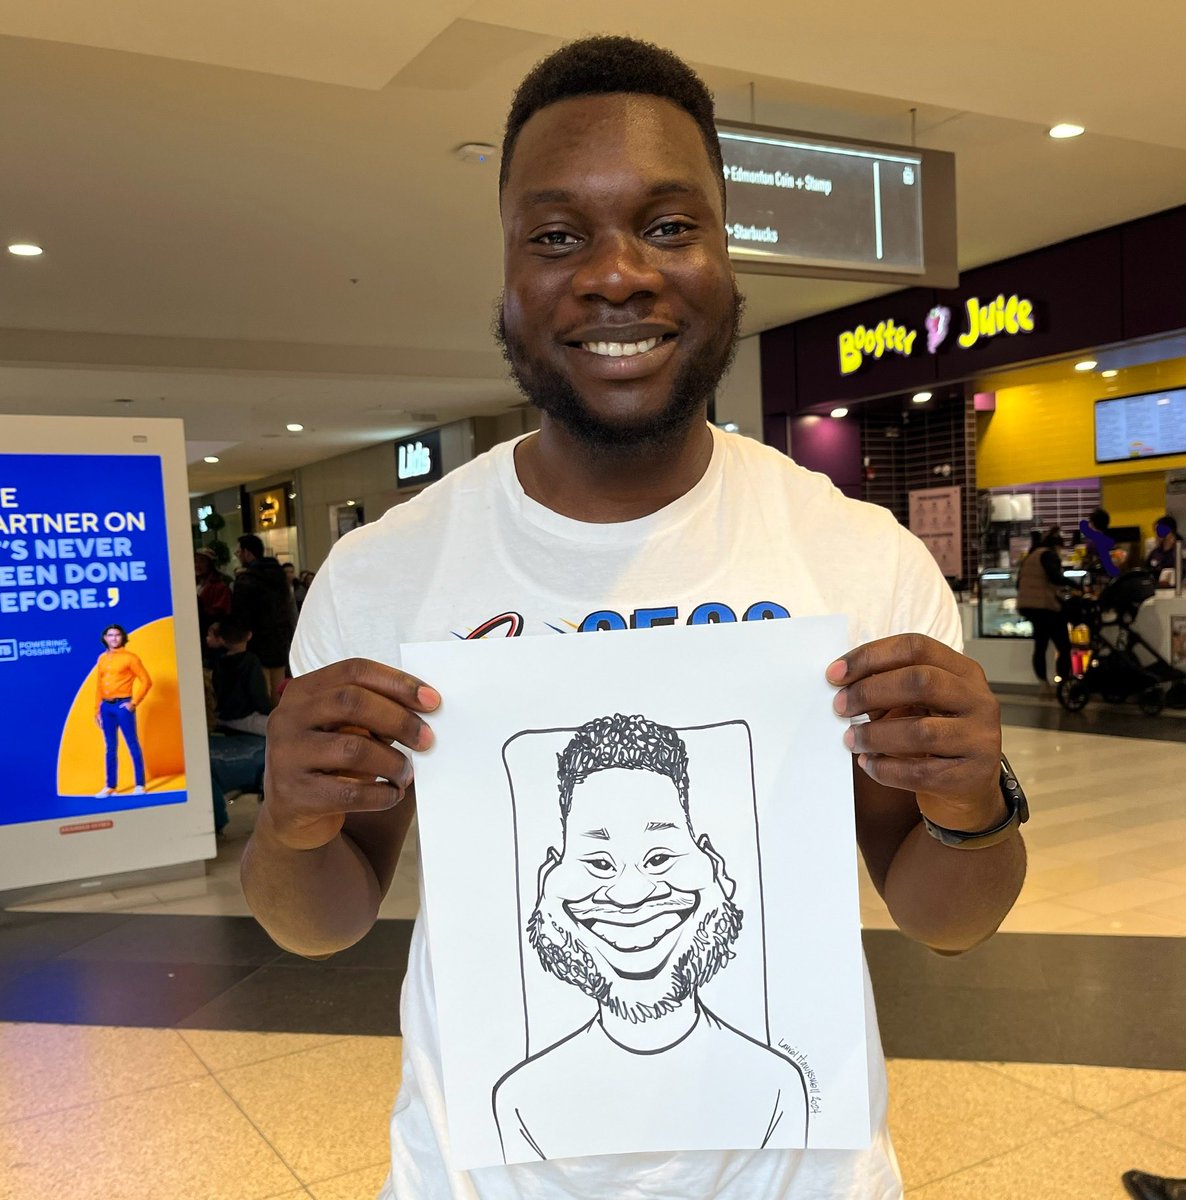 Had a great time doing caricatures at ⁦@Official_WEM⁩ yesterday! Here are some of the smiles I got to draw. I’ll be back this coming Thurs. & Sat., 1 - 4 pm by the Lego Store. #Yeg #caricature #art #YegEvents #YegArtists